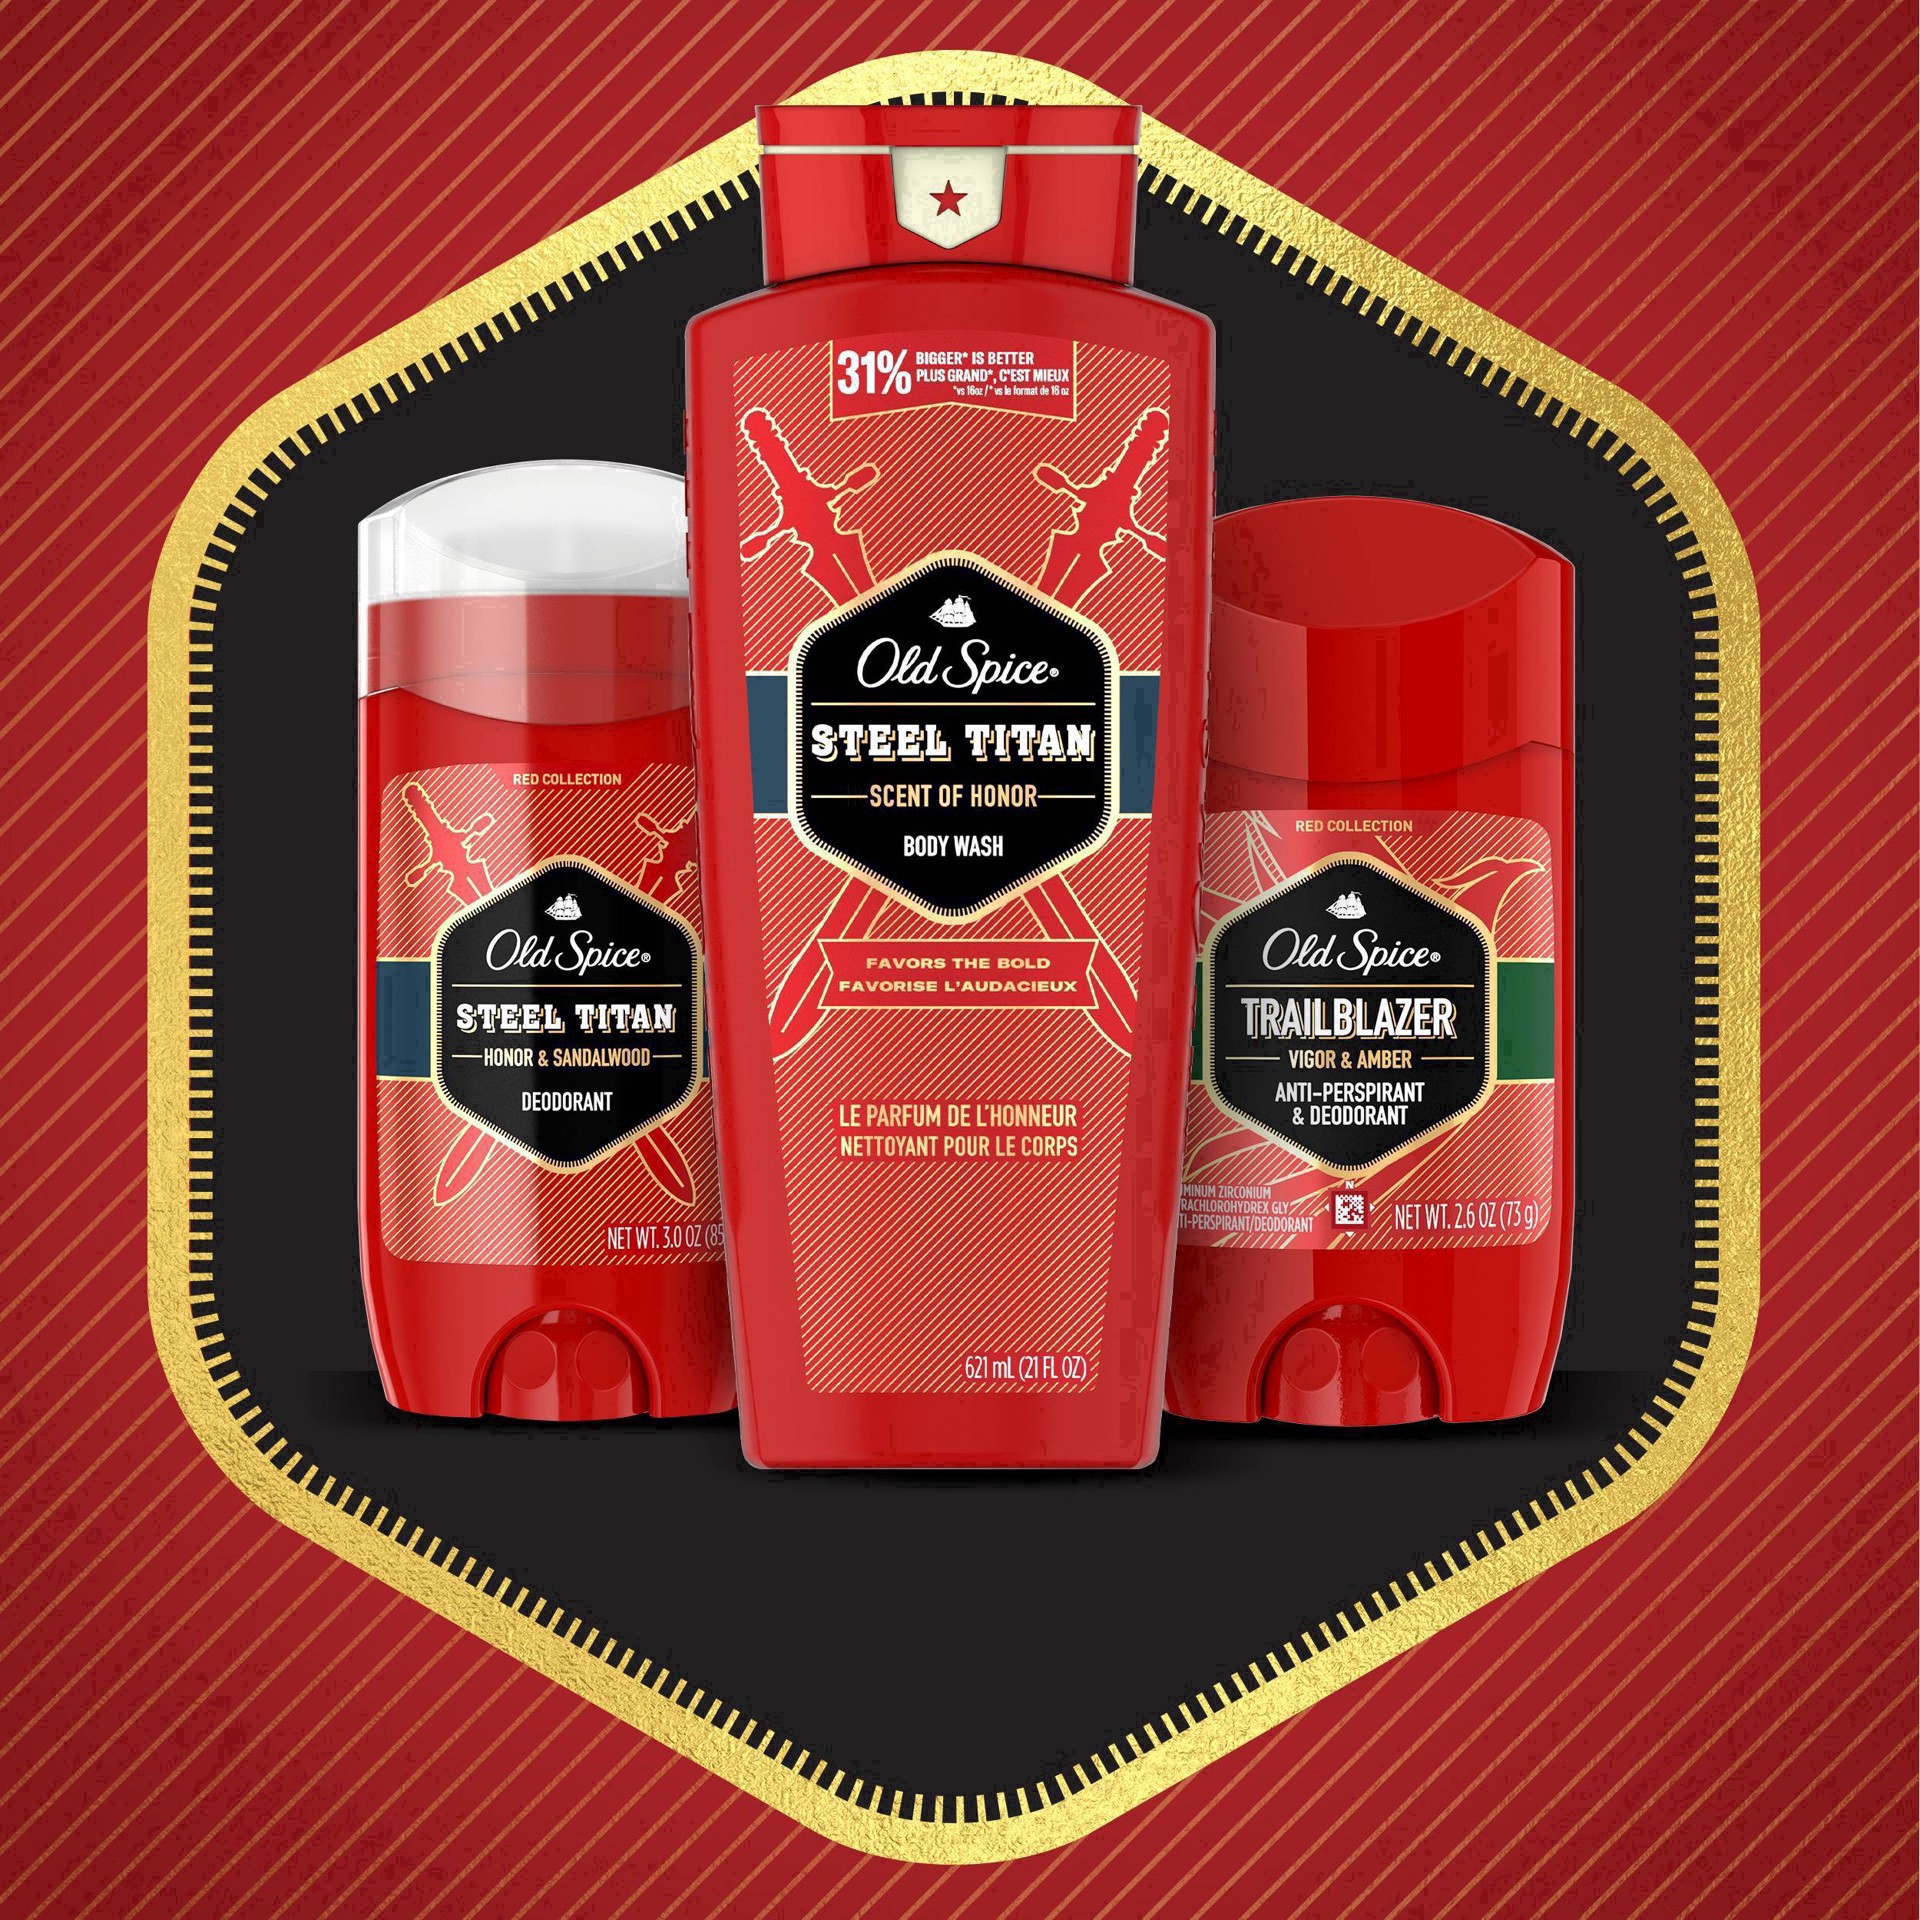 slide 3 of 95, Old Spice Red Collection Swagger Scent Deodorant for Men, Value Pack, 3.0 oz, Pack of 2, 2 ct; 3 oz